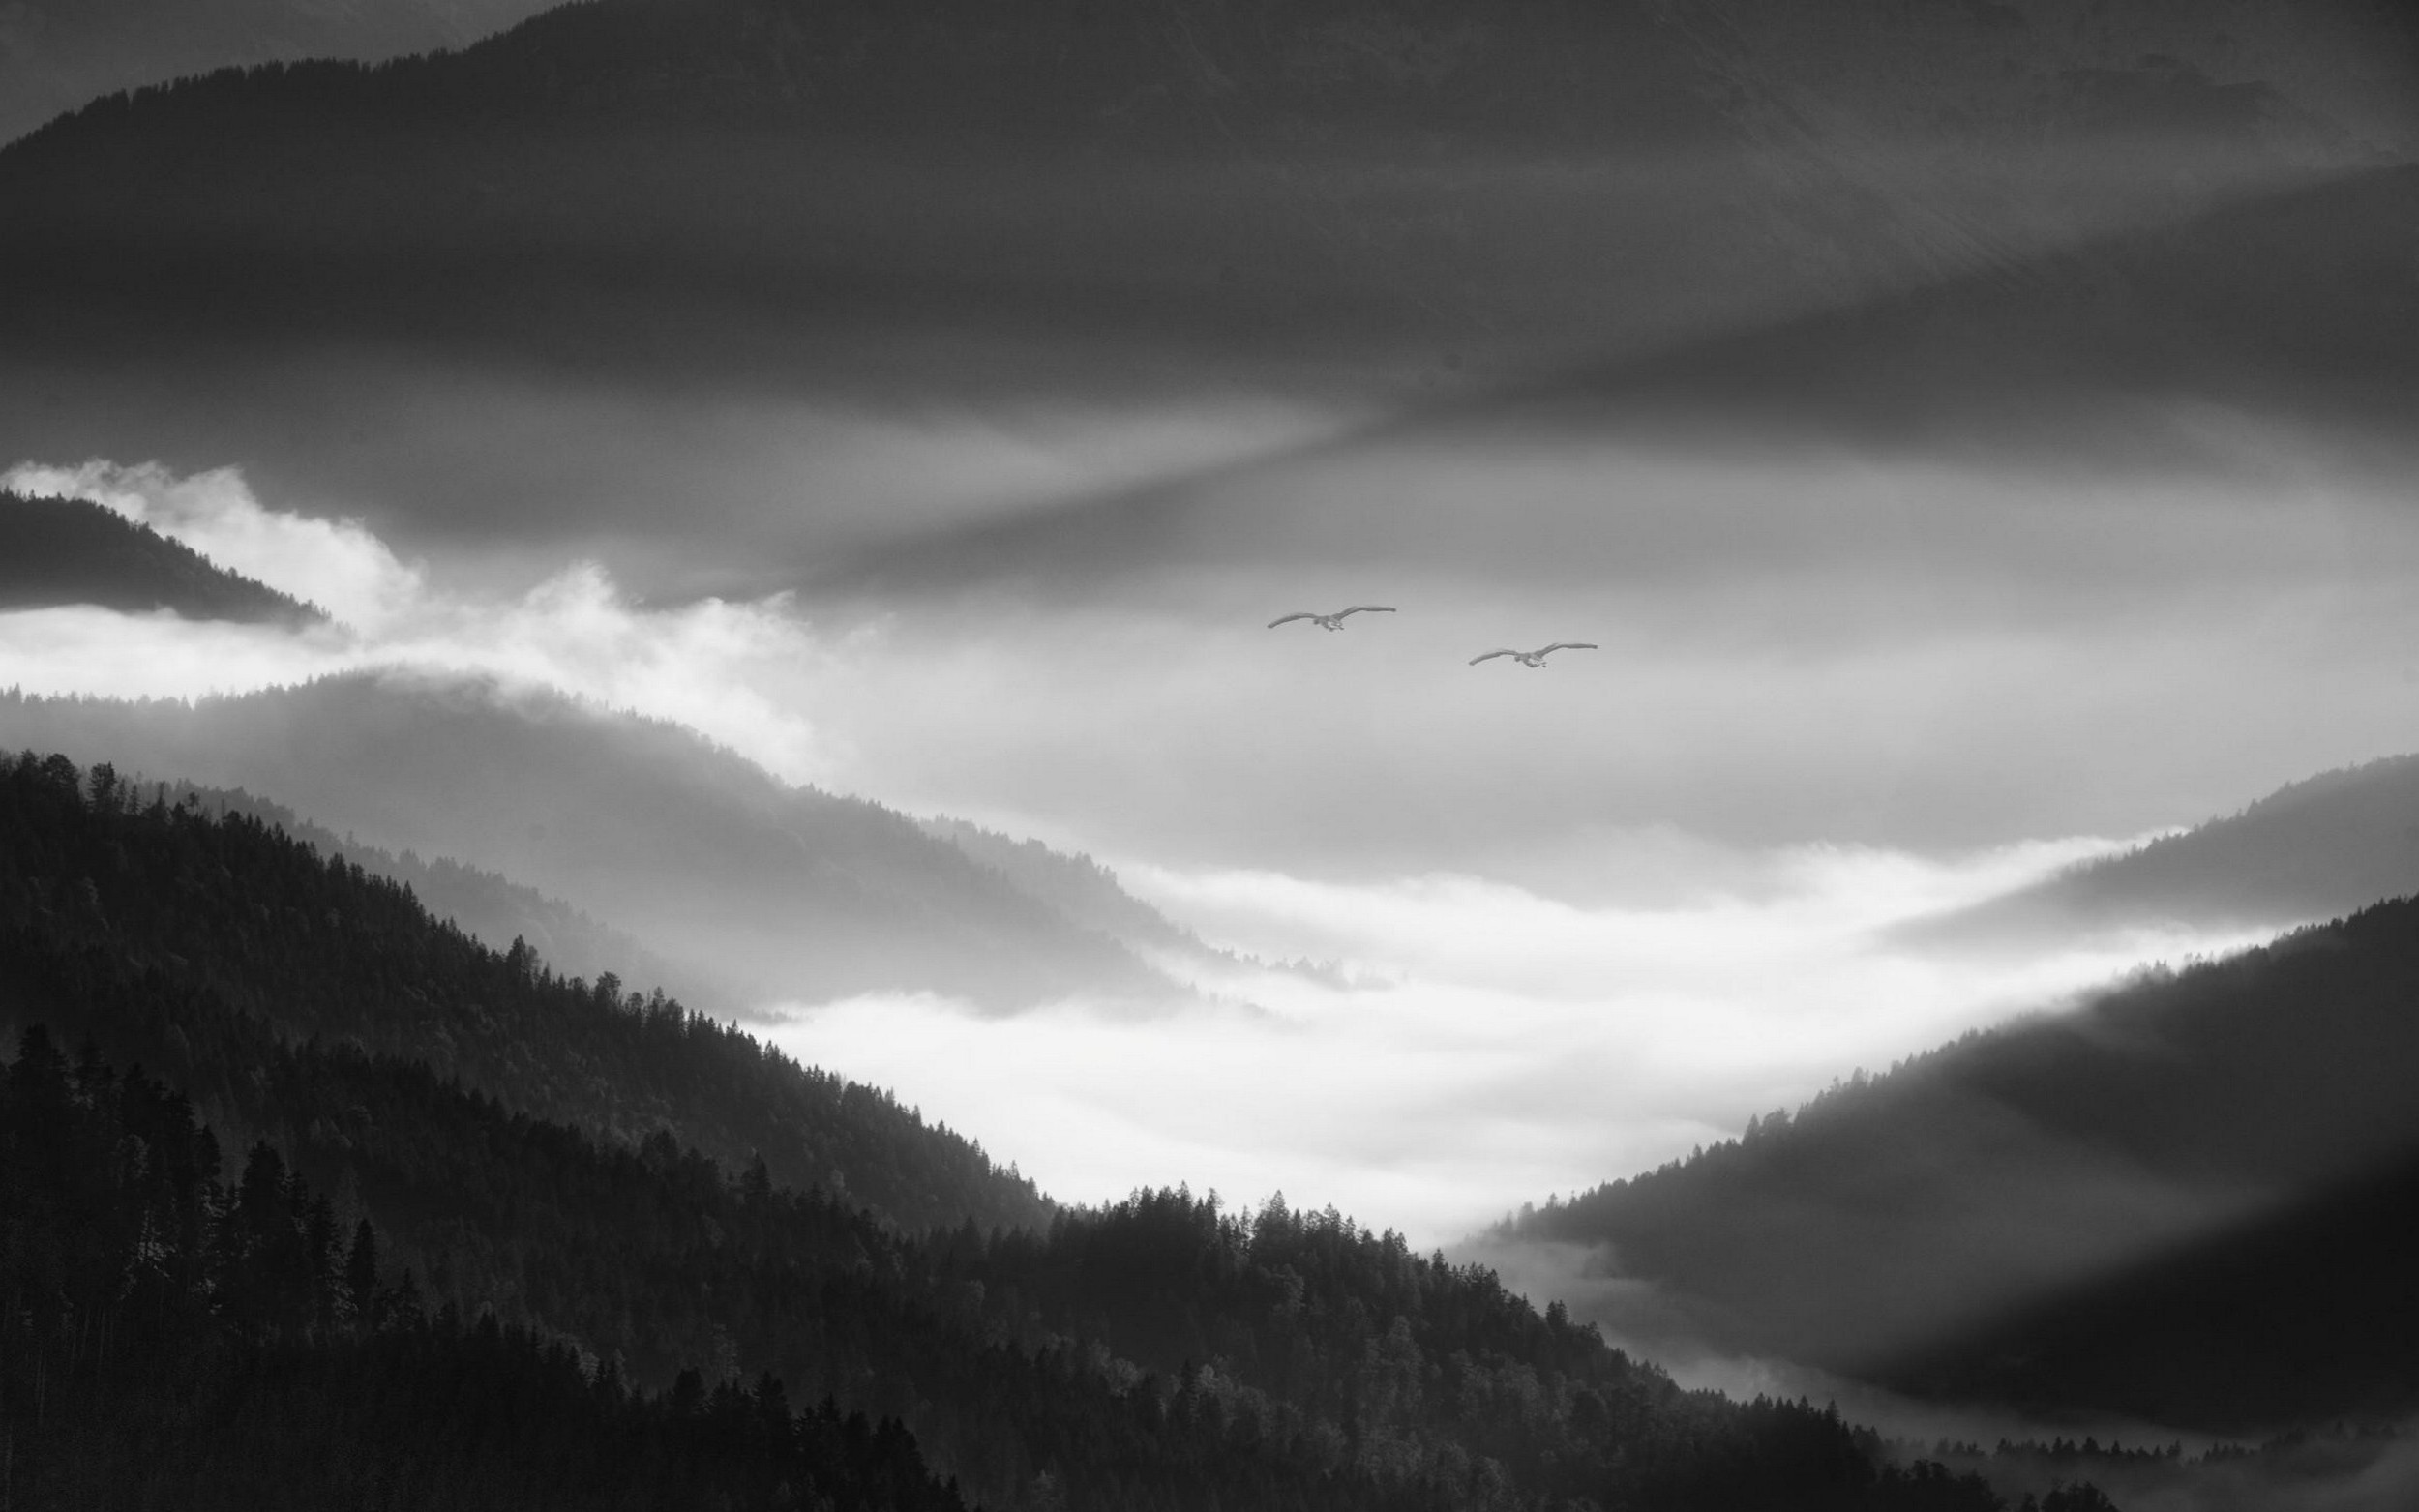 nature, Landscape, Morning, Mist, Alps, Mountain, Forest, Valley, Birds, Flying, Monochrome, Germany Wallpaper